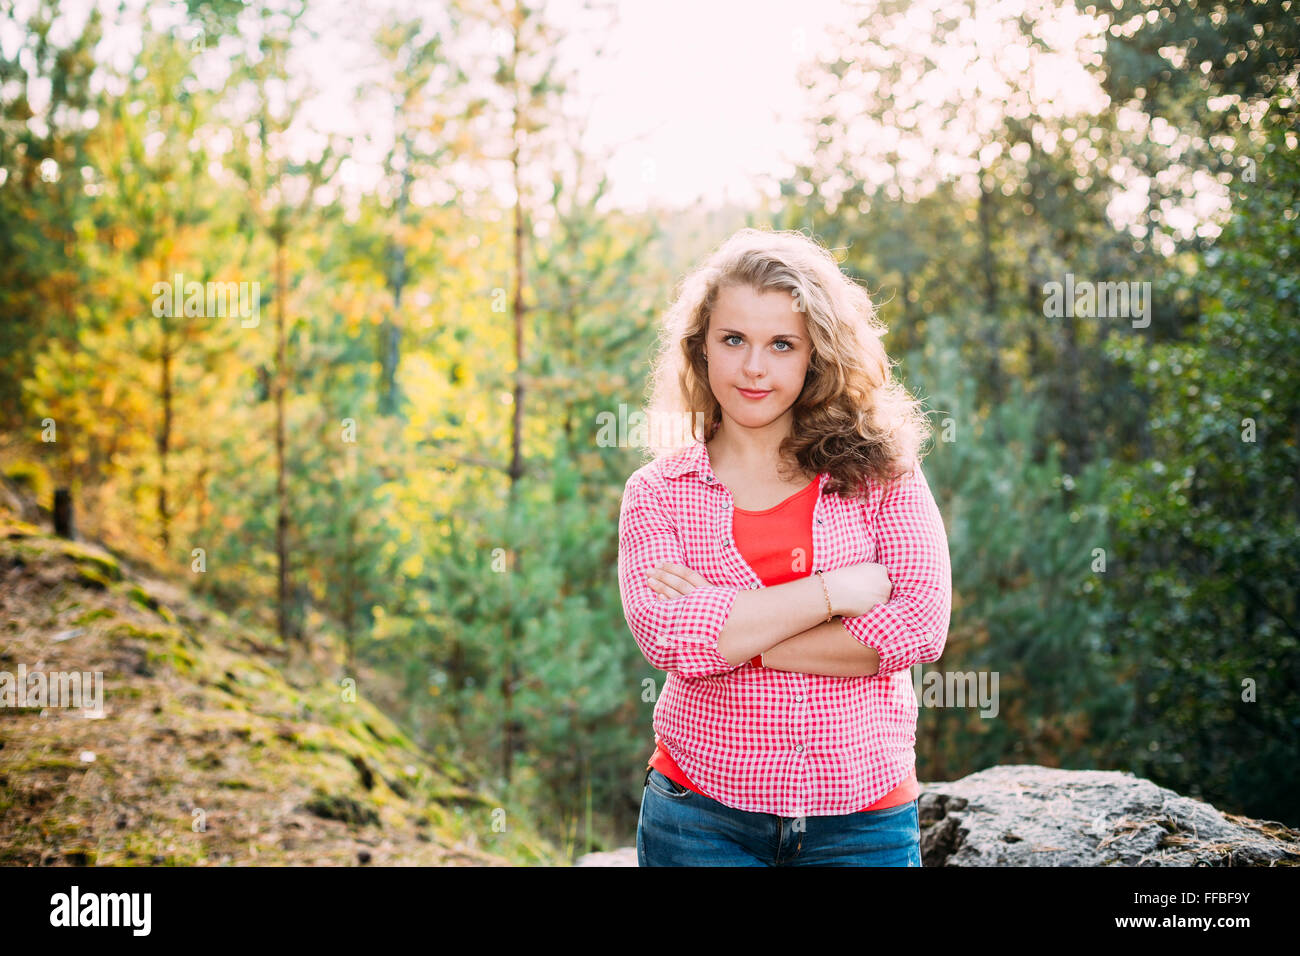 Beautiful Plus Size Young Smiling Woman In Shirt Posing In Summer Forest. Stock Photo